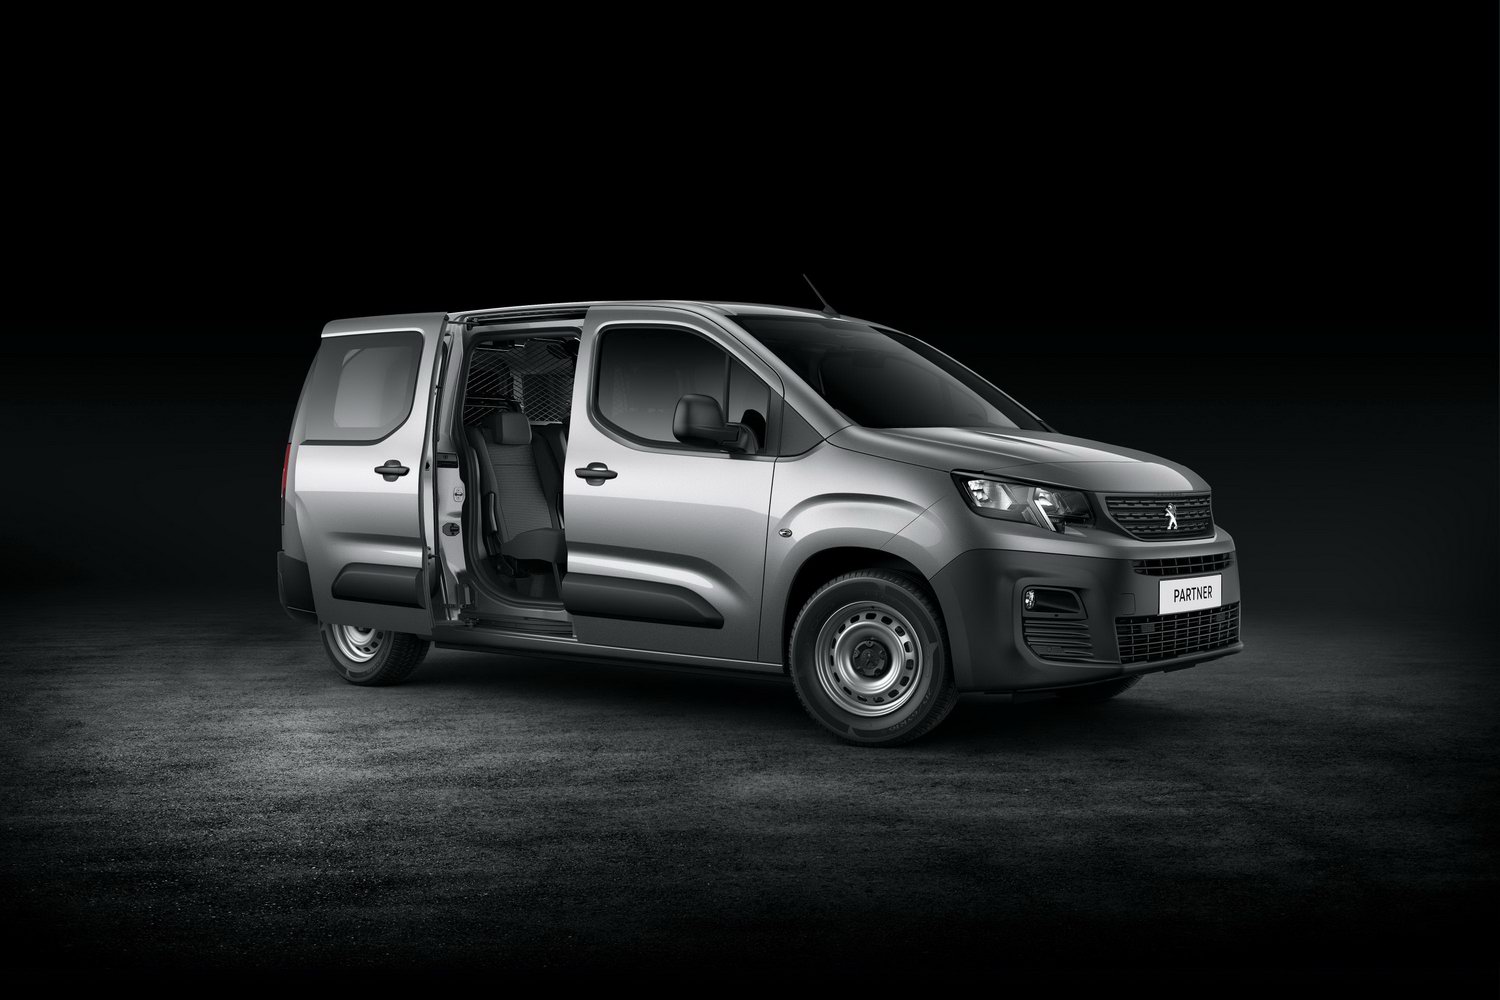 Van Reviews | I just purchased a Peugeot Partner privately... | CompleteVan.ie